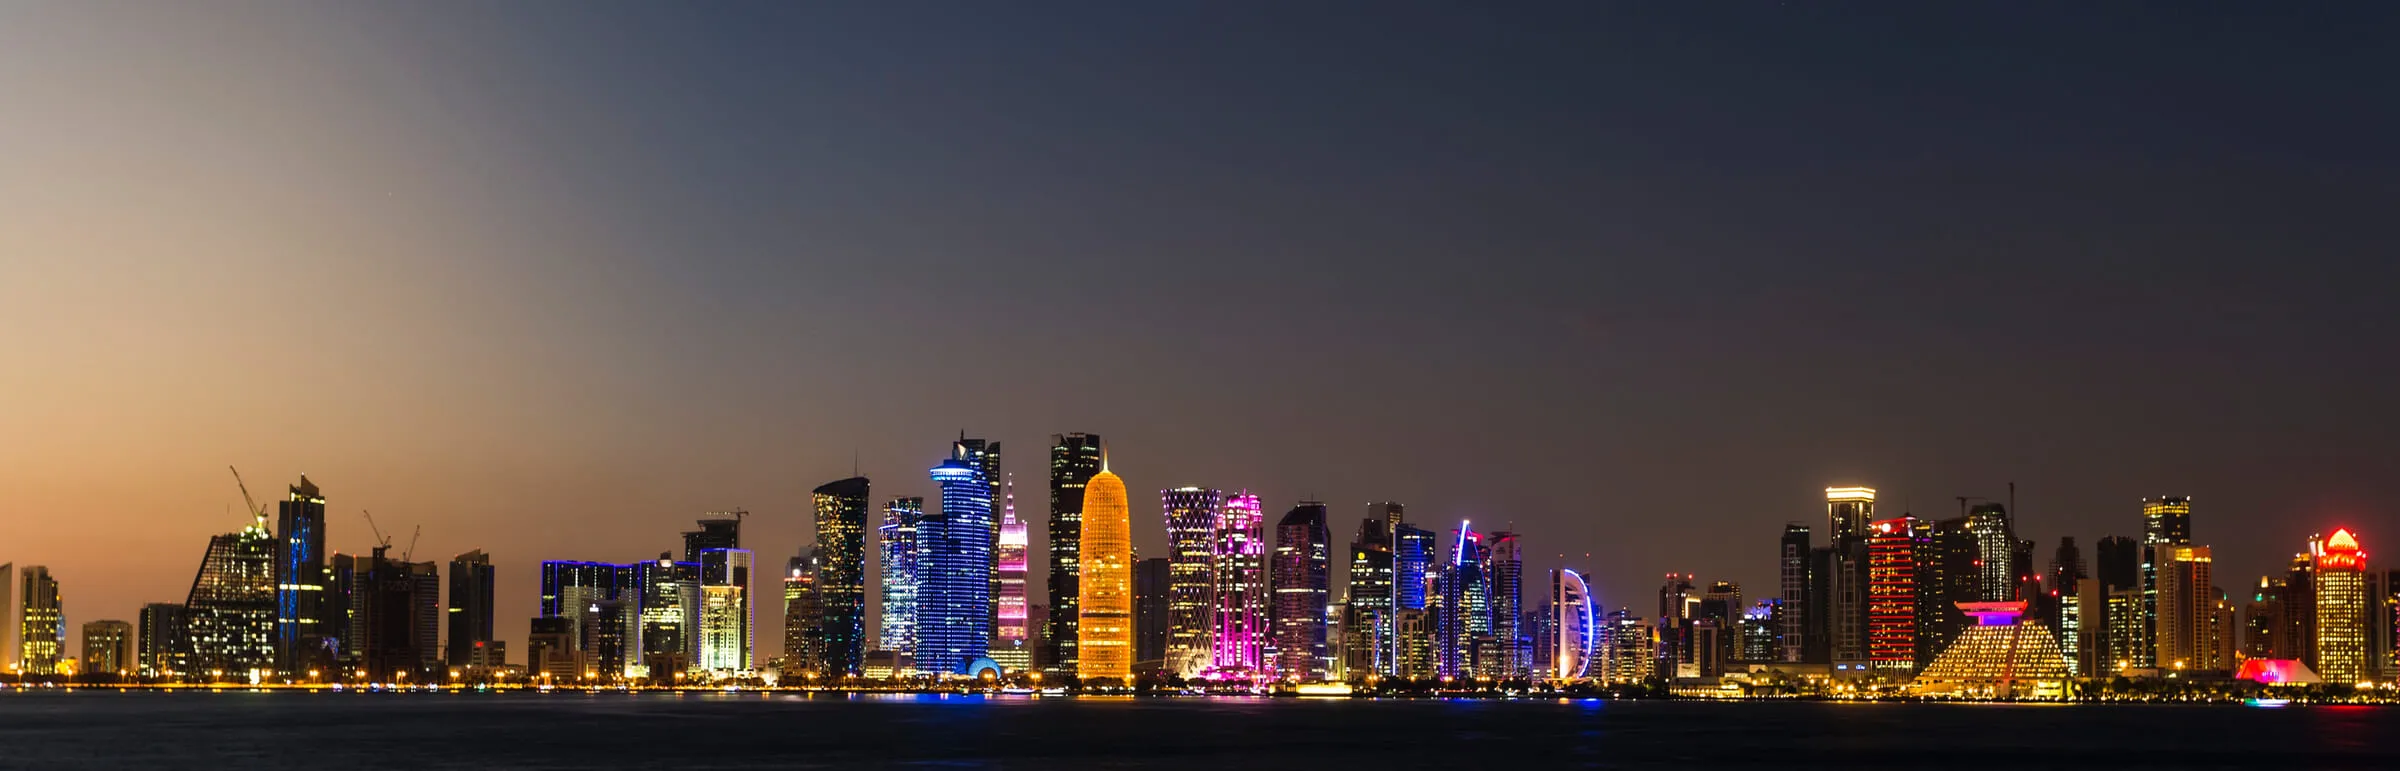 Doha, Qatar skyline at night as photographed from the Arabian Gulf, also known as the Persian Gulf.